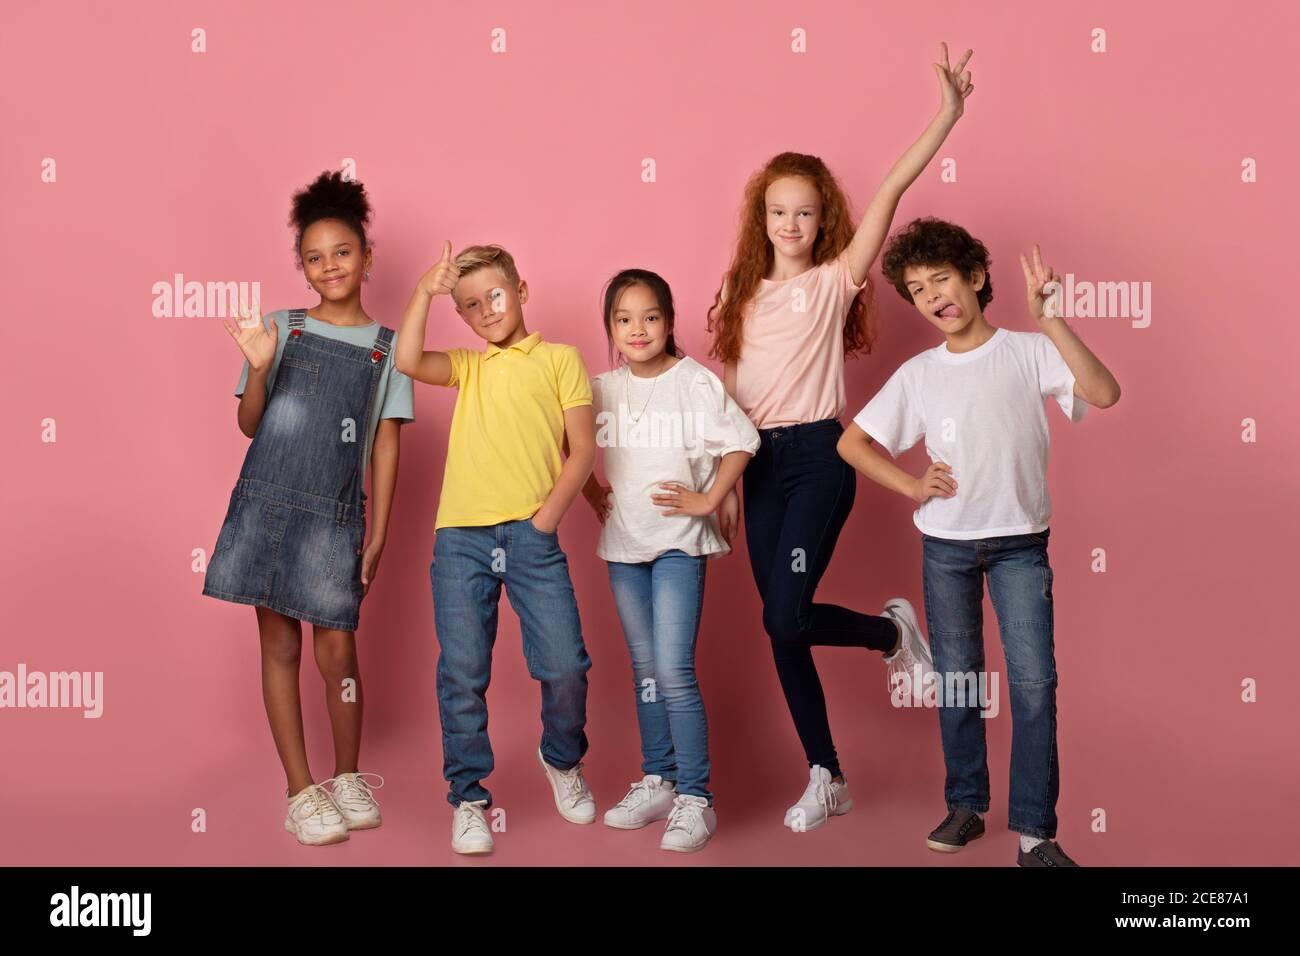 Joyful schoolkids making faces and showing variety of gestures over pink background, full length portrait Stock Photo